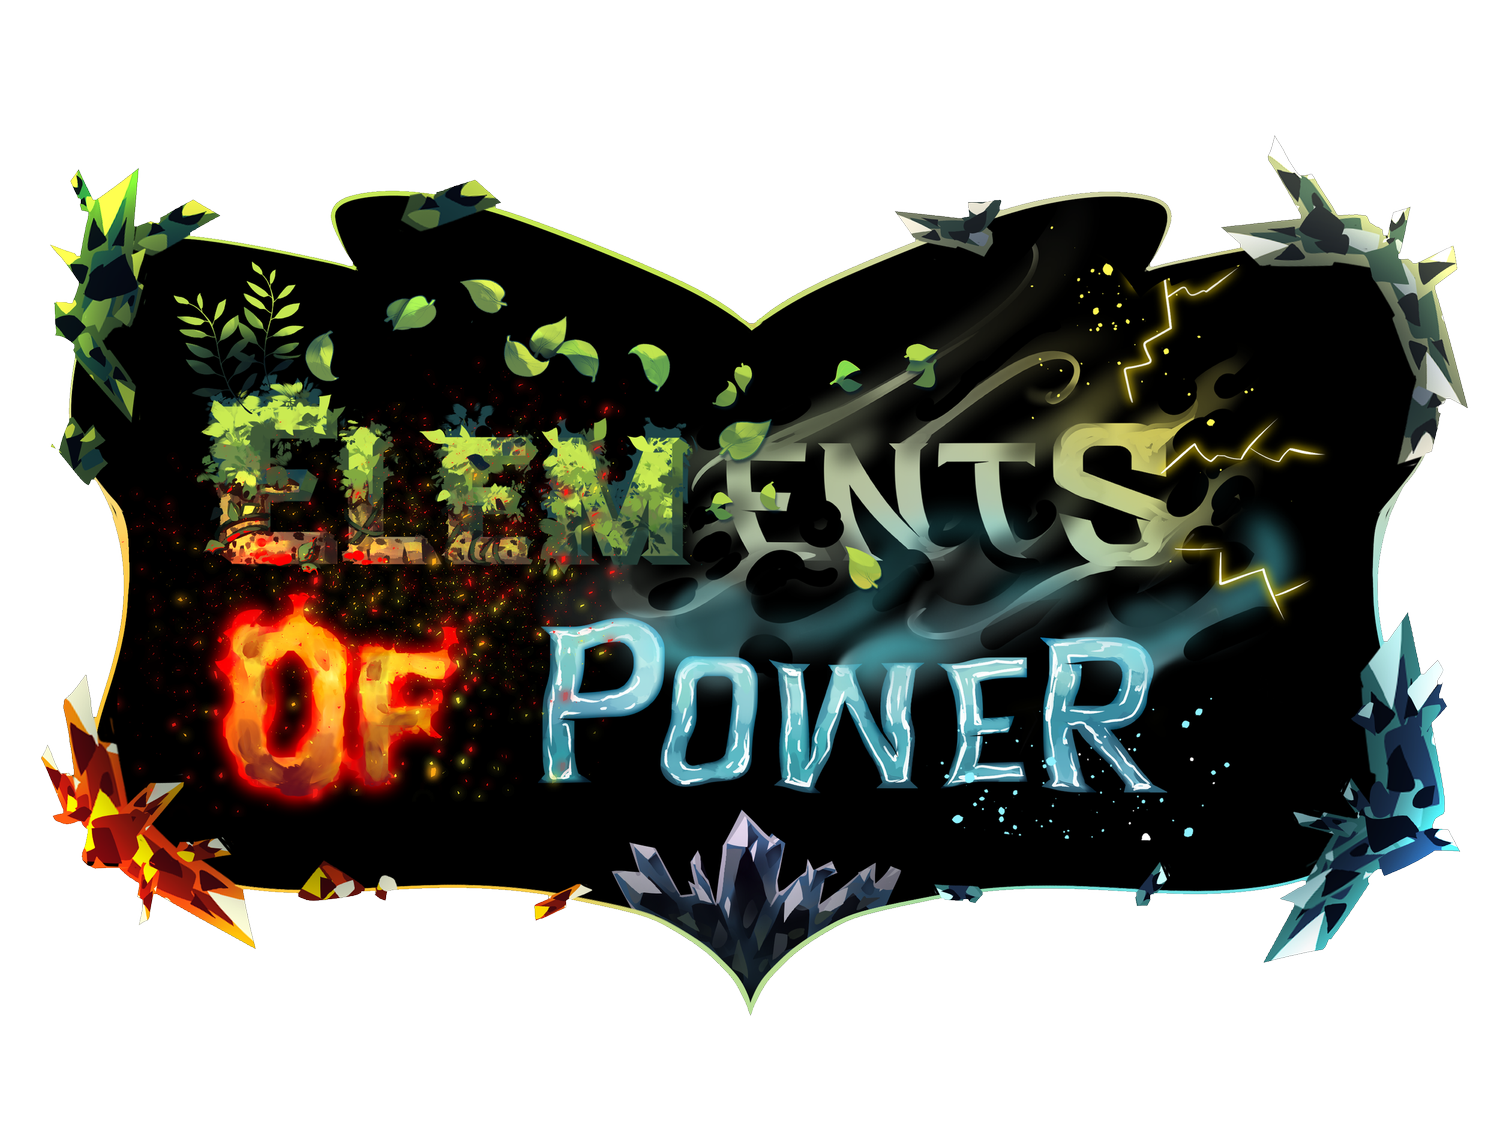 Elements of Power